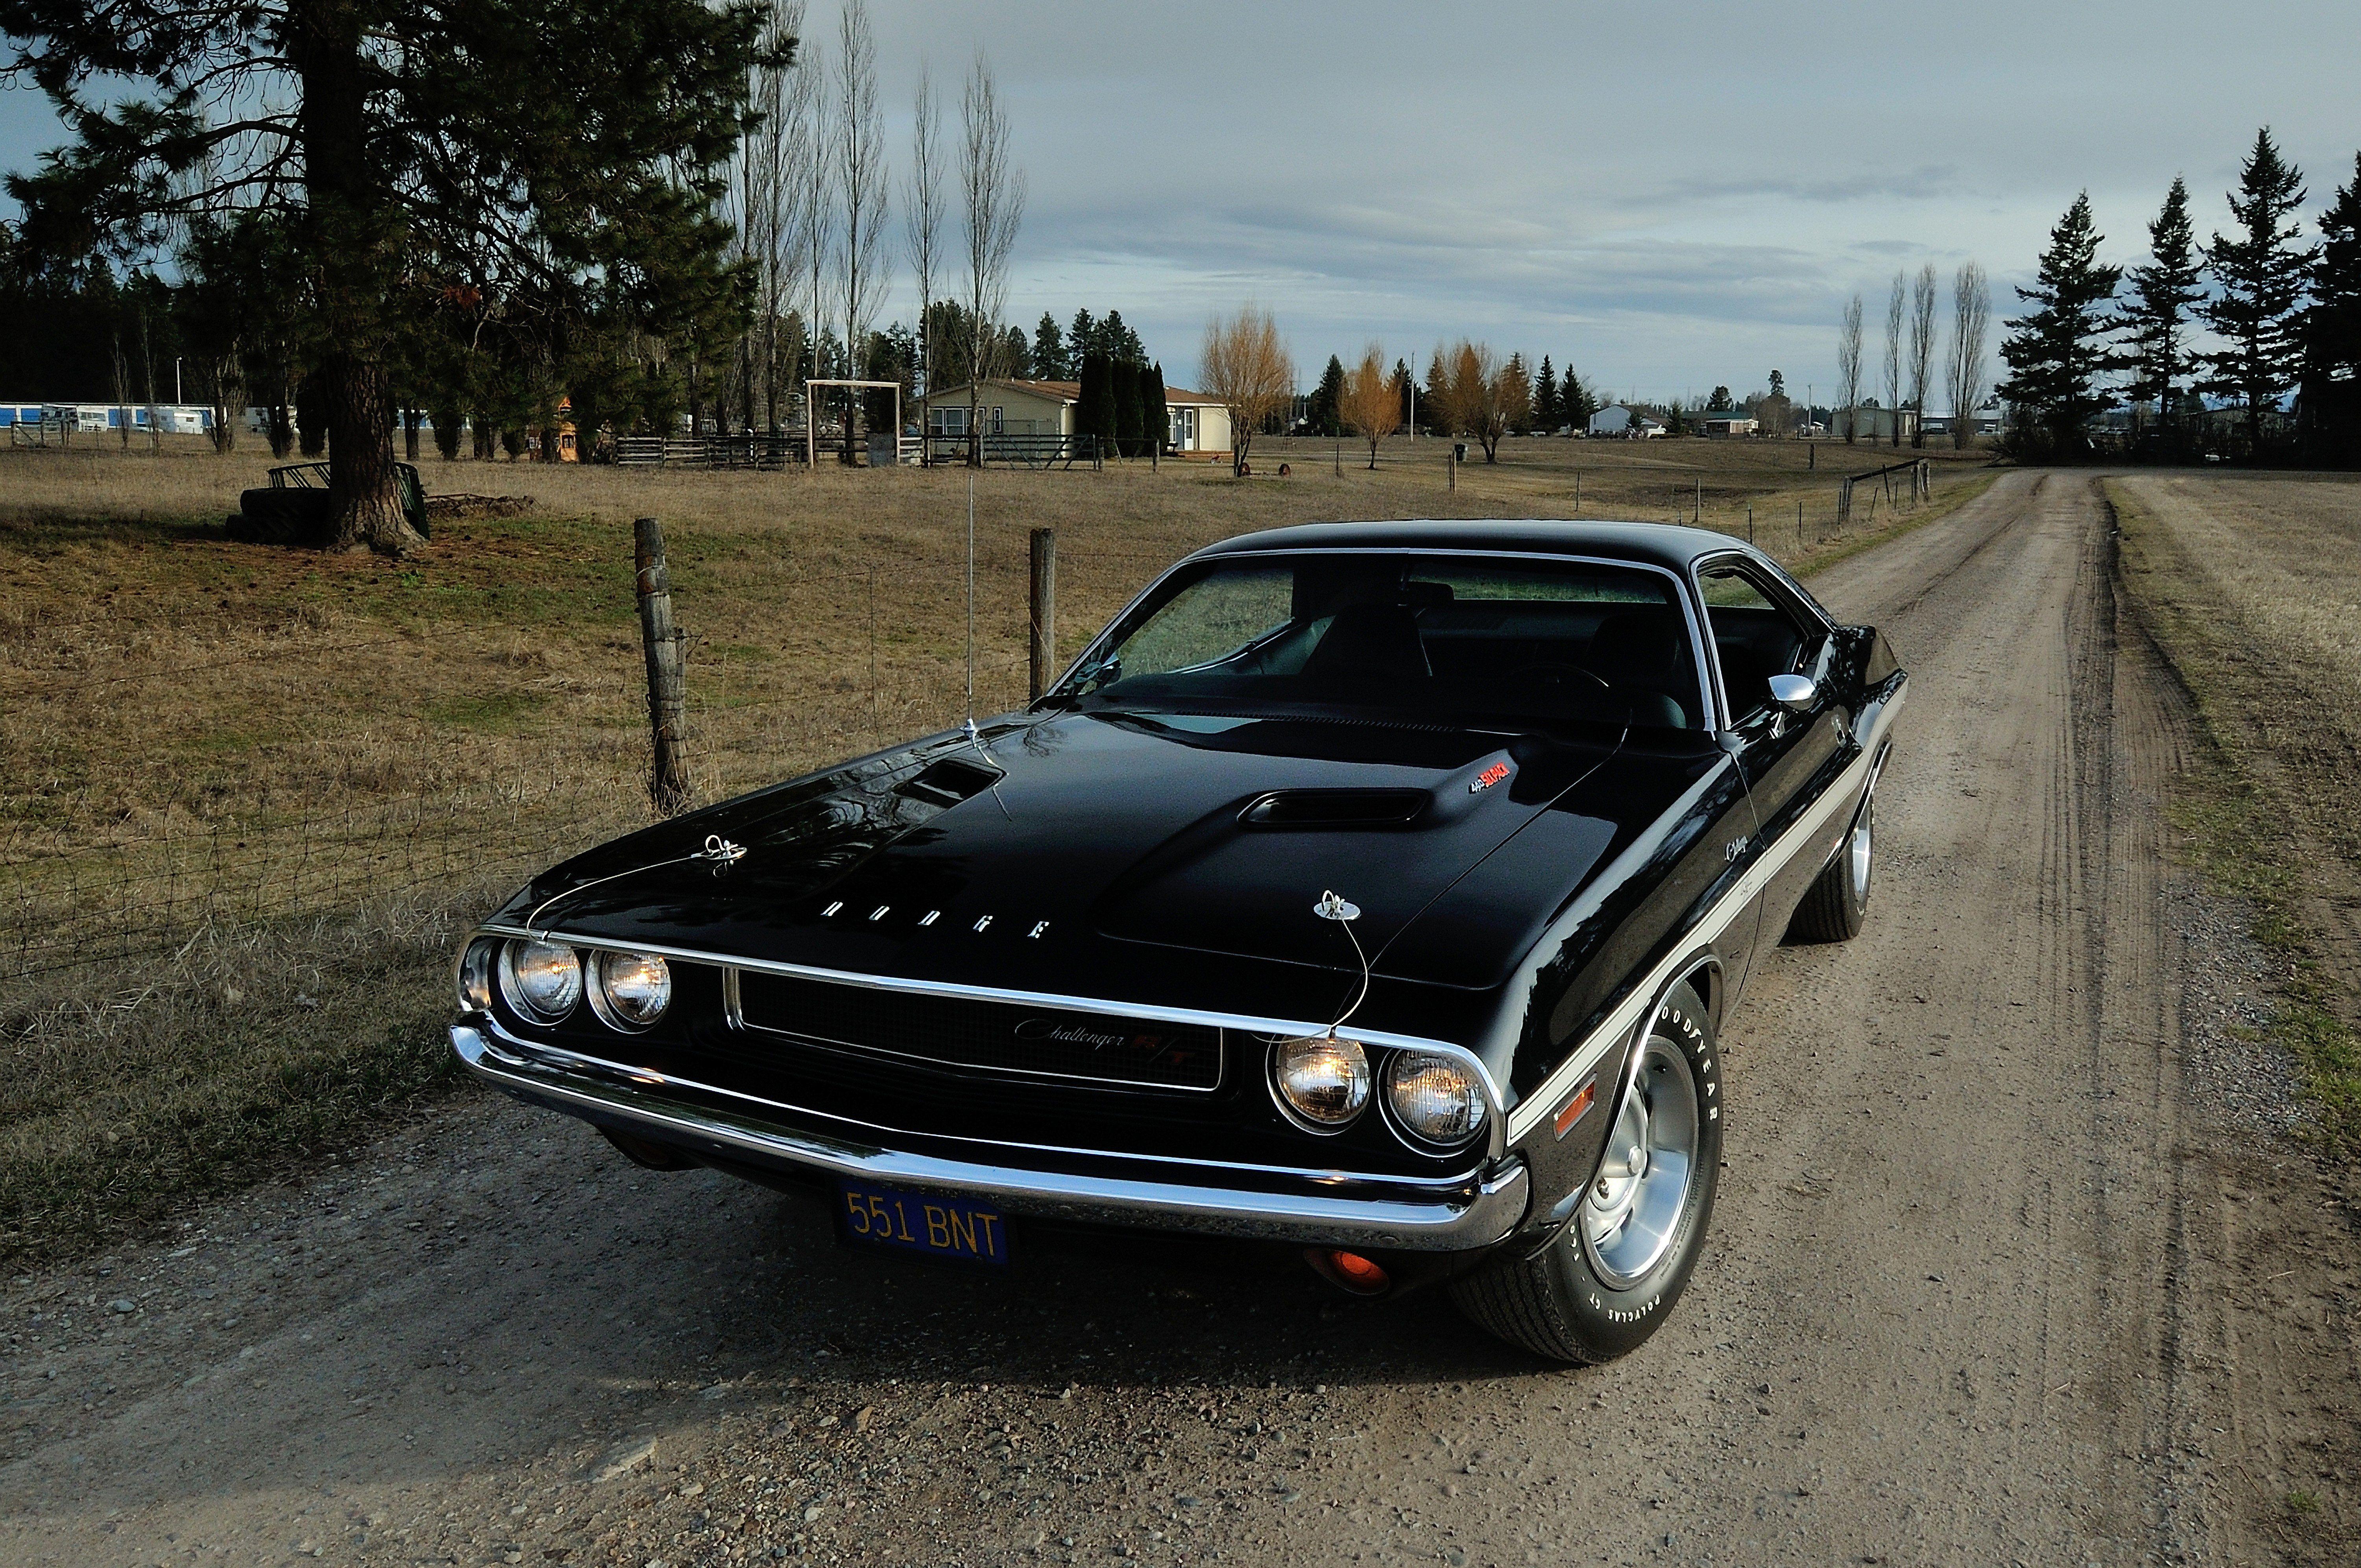 Dodge Challenger RT 440 Six Pack Muscle Classic Old Original